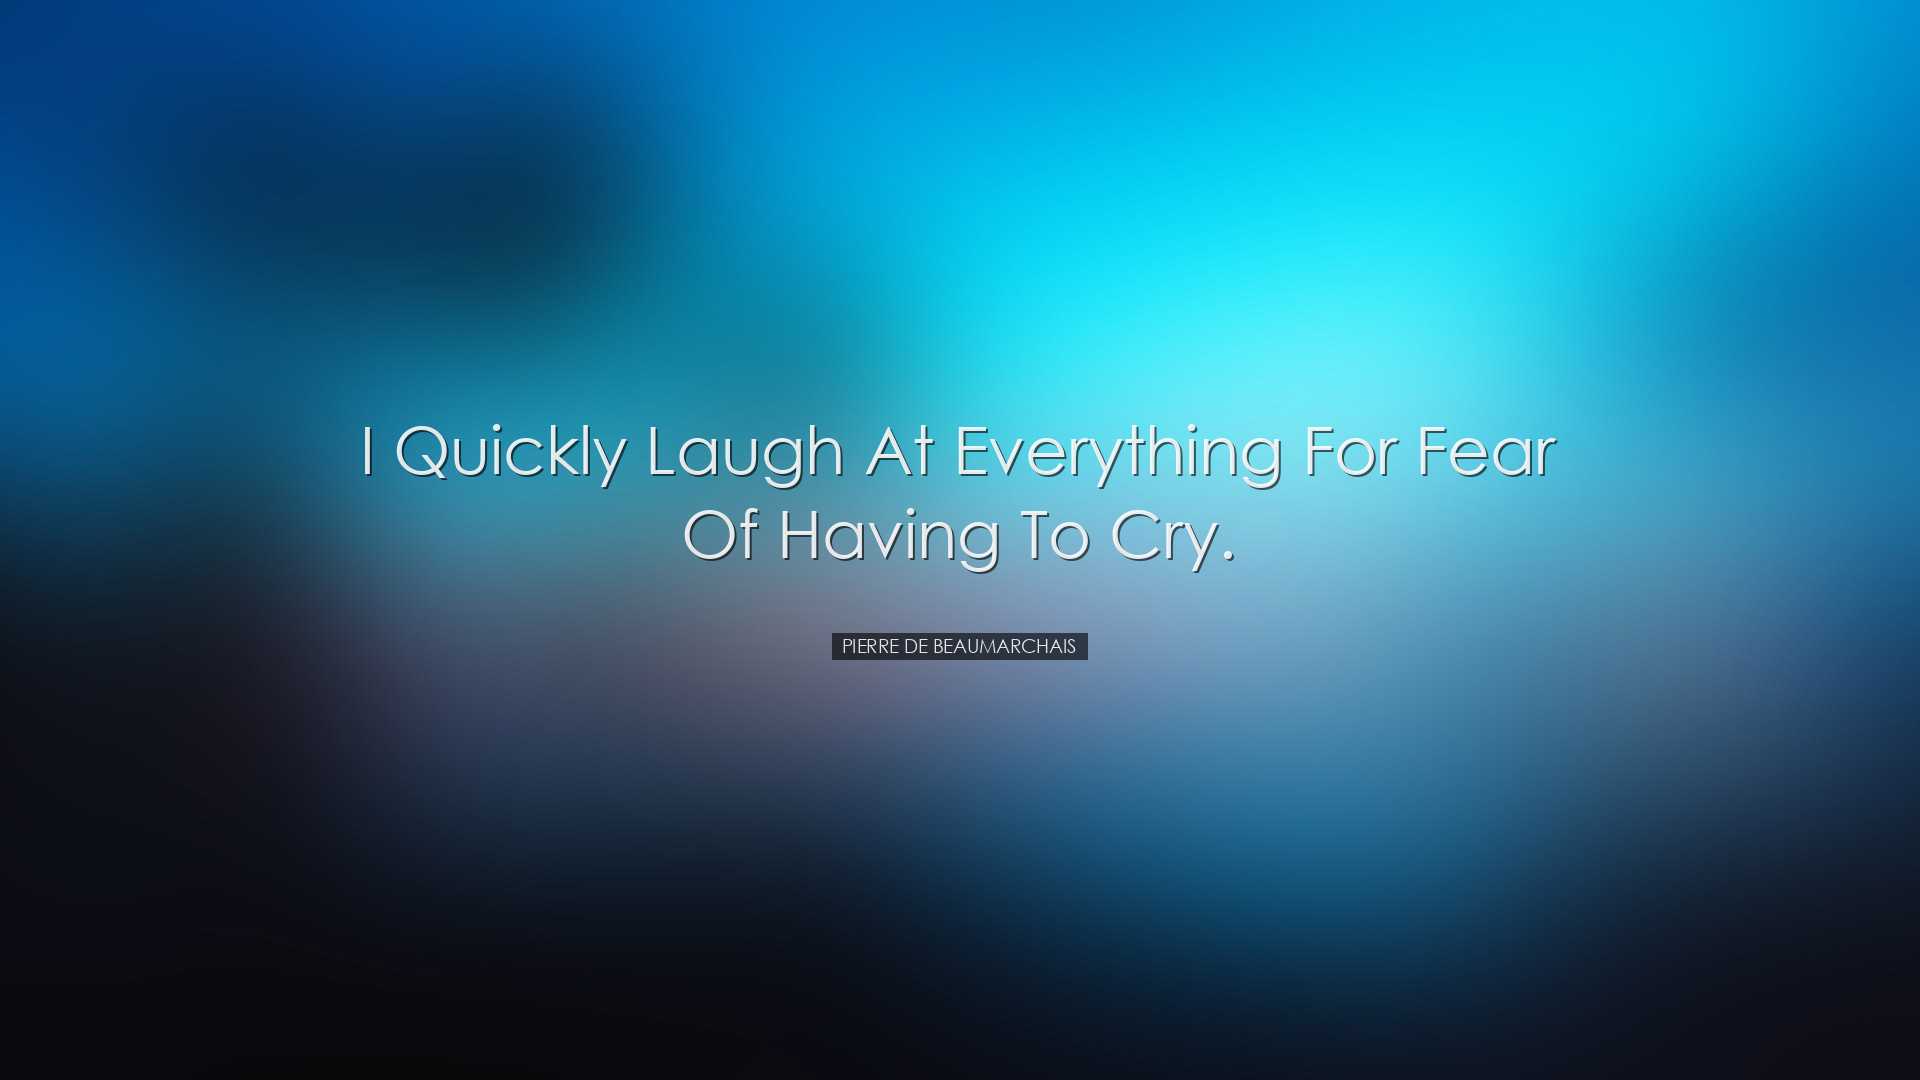 I quickly laugh at everything for fear of having to cry. - Pierre